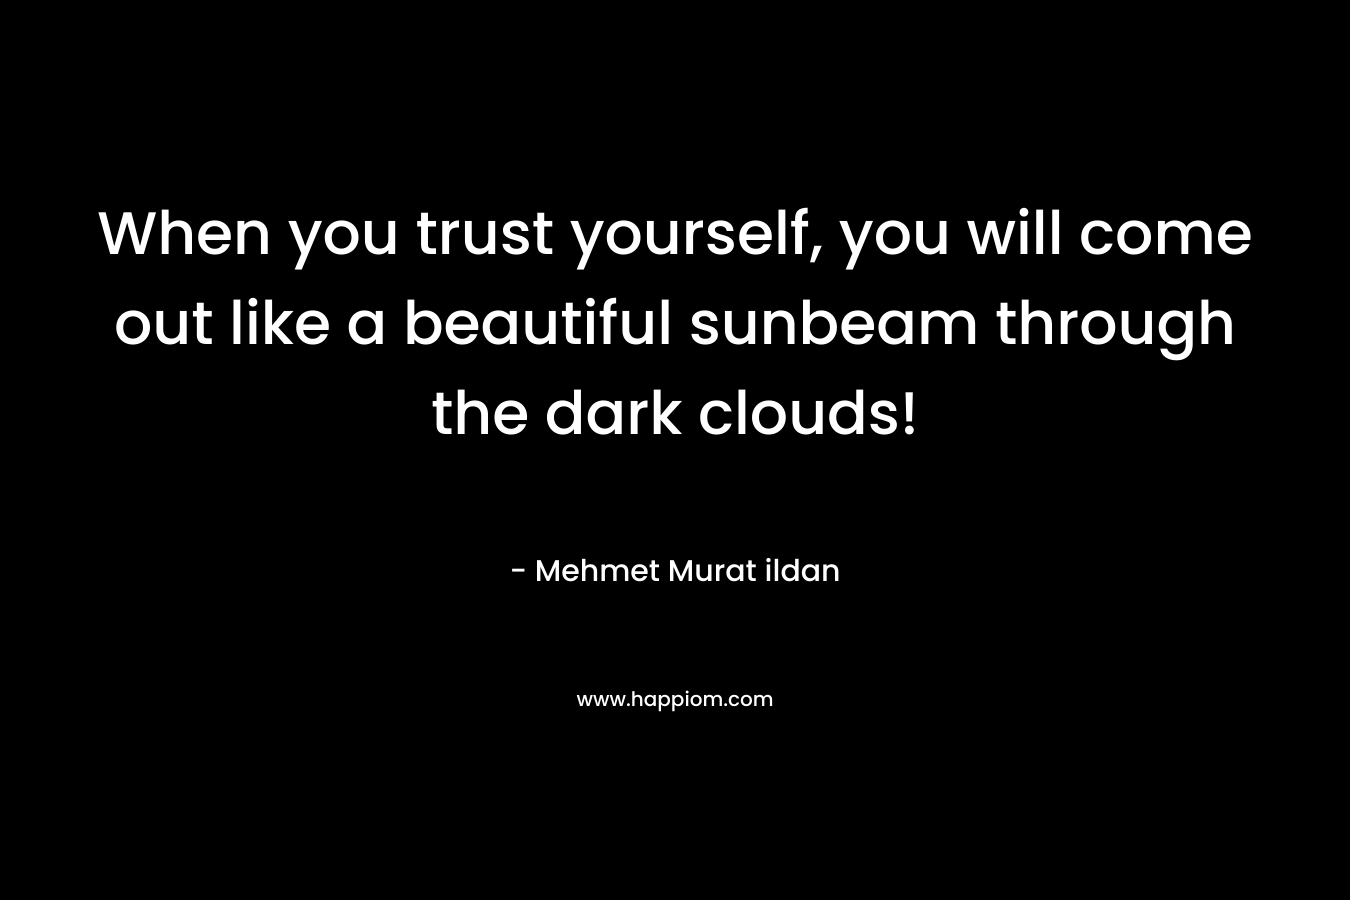 When you trust yourself, you will come out like a beautiful sunbeam through the dark clouds!